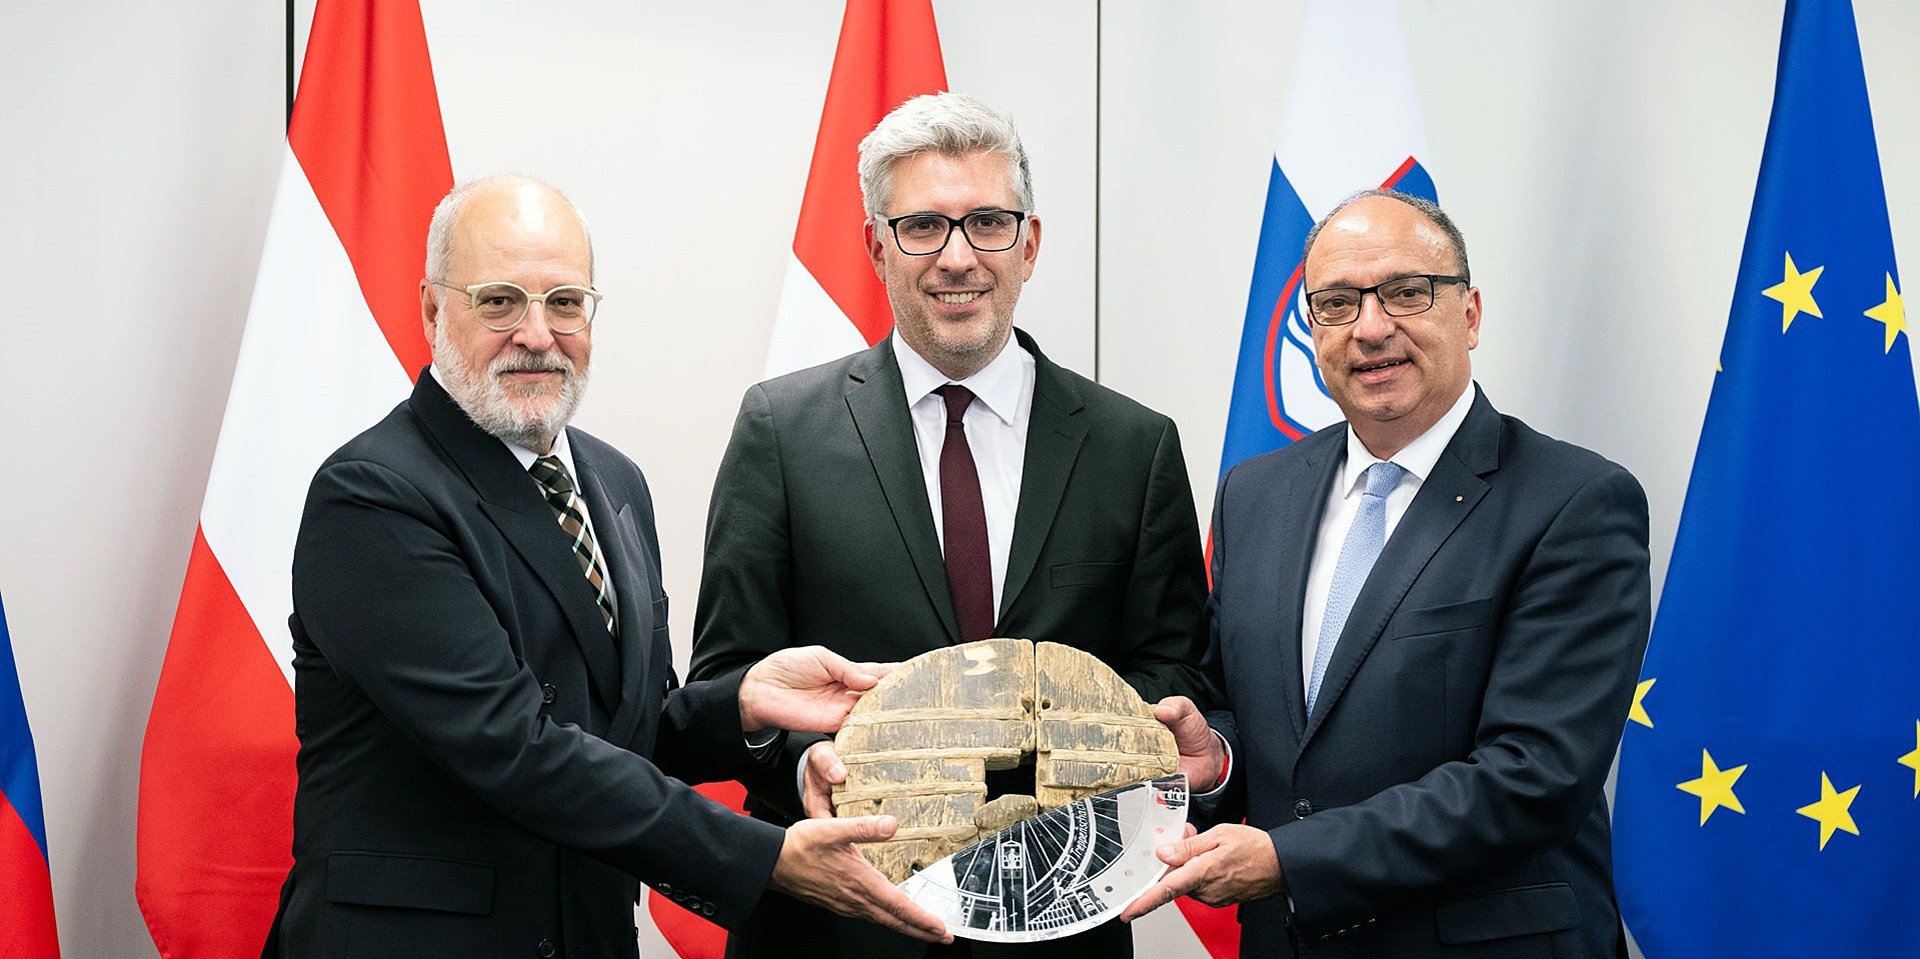 From left to right: Alexandre Fasel, state Secretary of the FDFA, Marko Štucin, Slovenia’s state Secretary for European Affairs, and Markus Dieth, president of the Conference of Cantonal Governments.